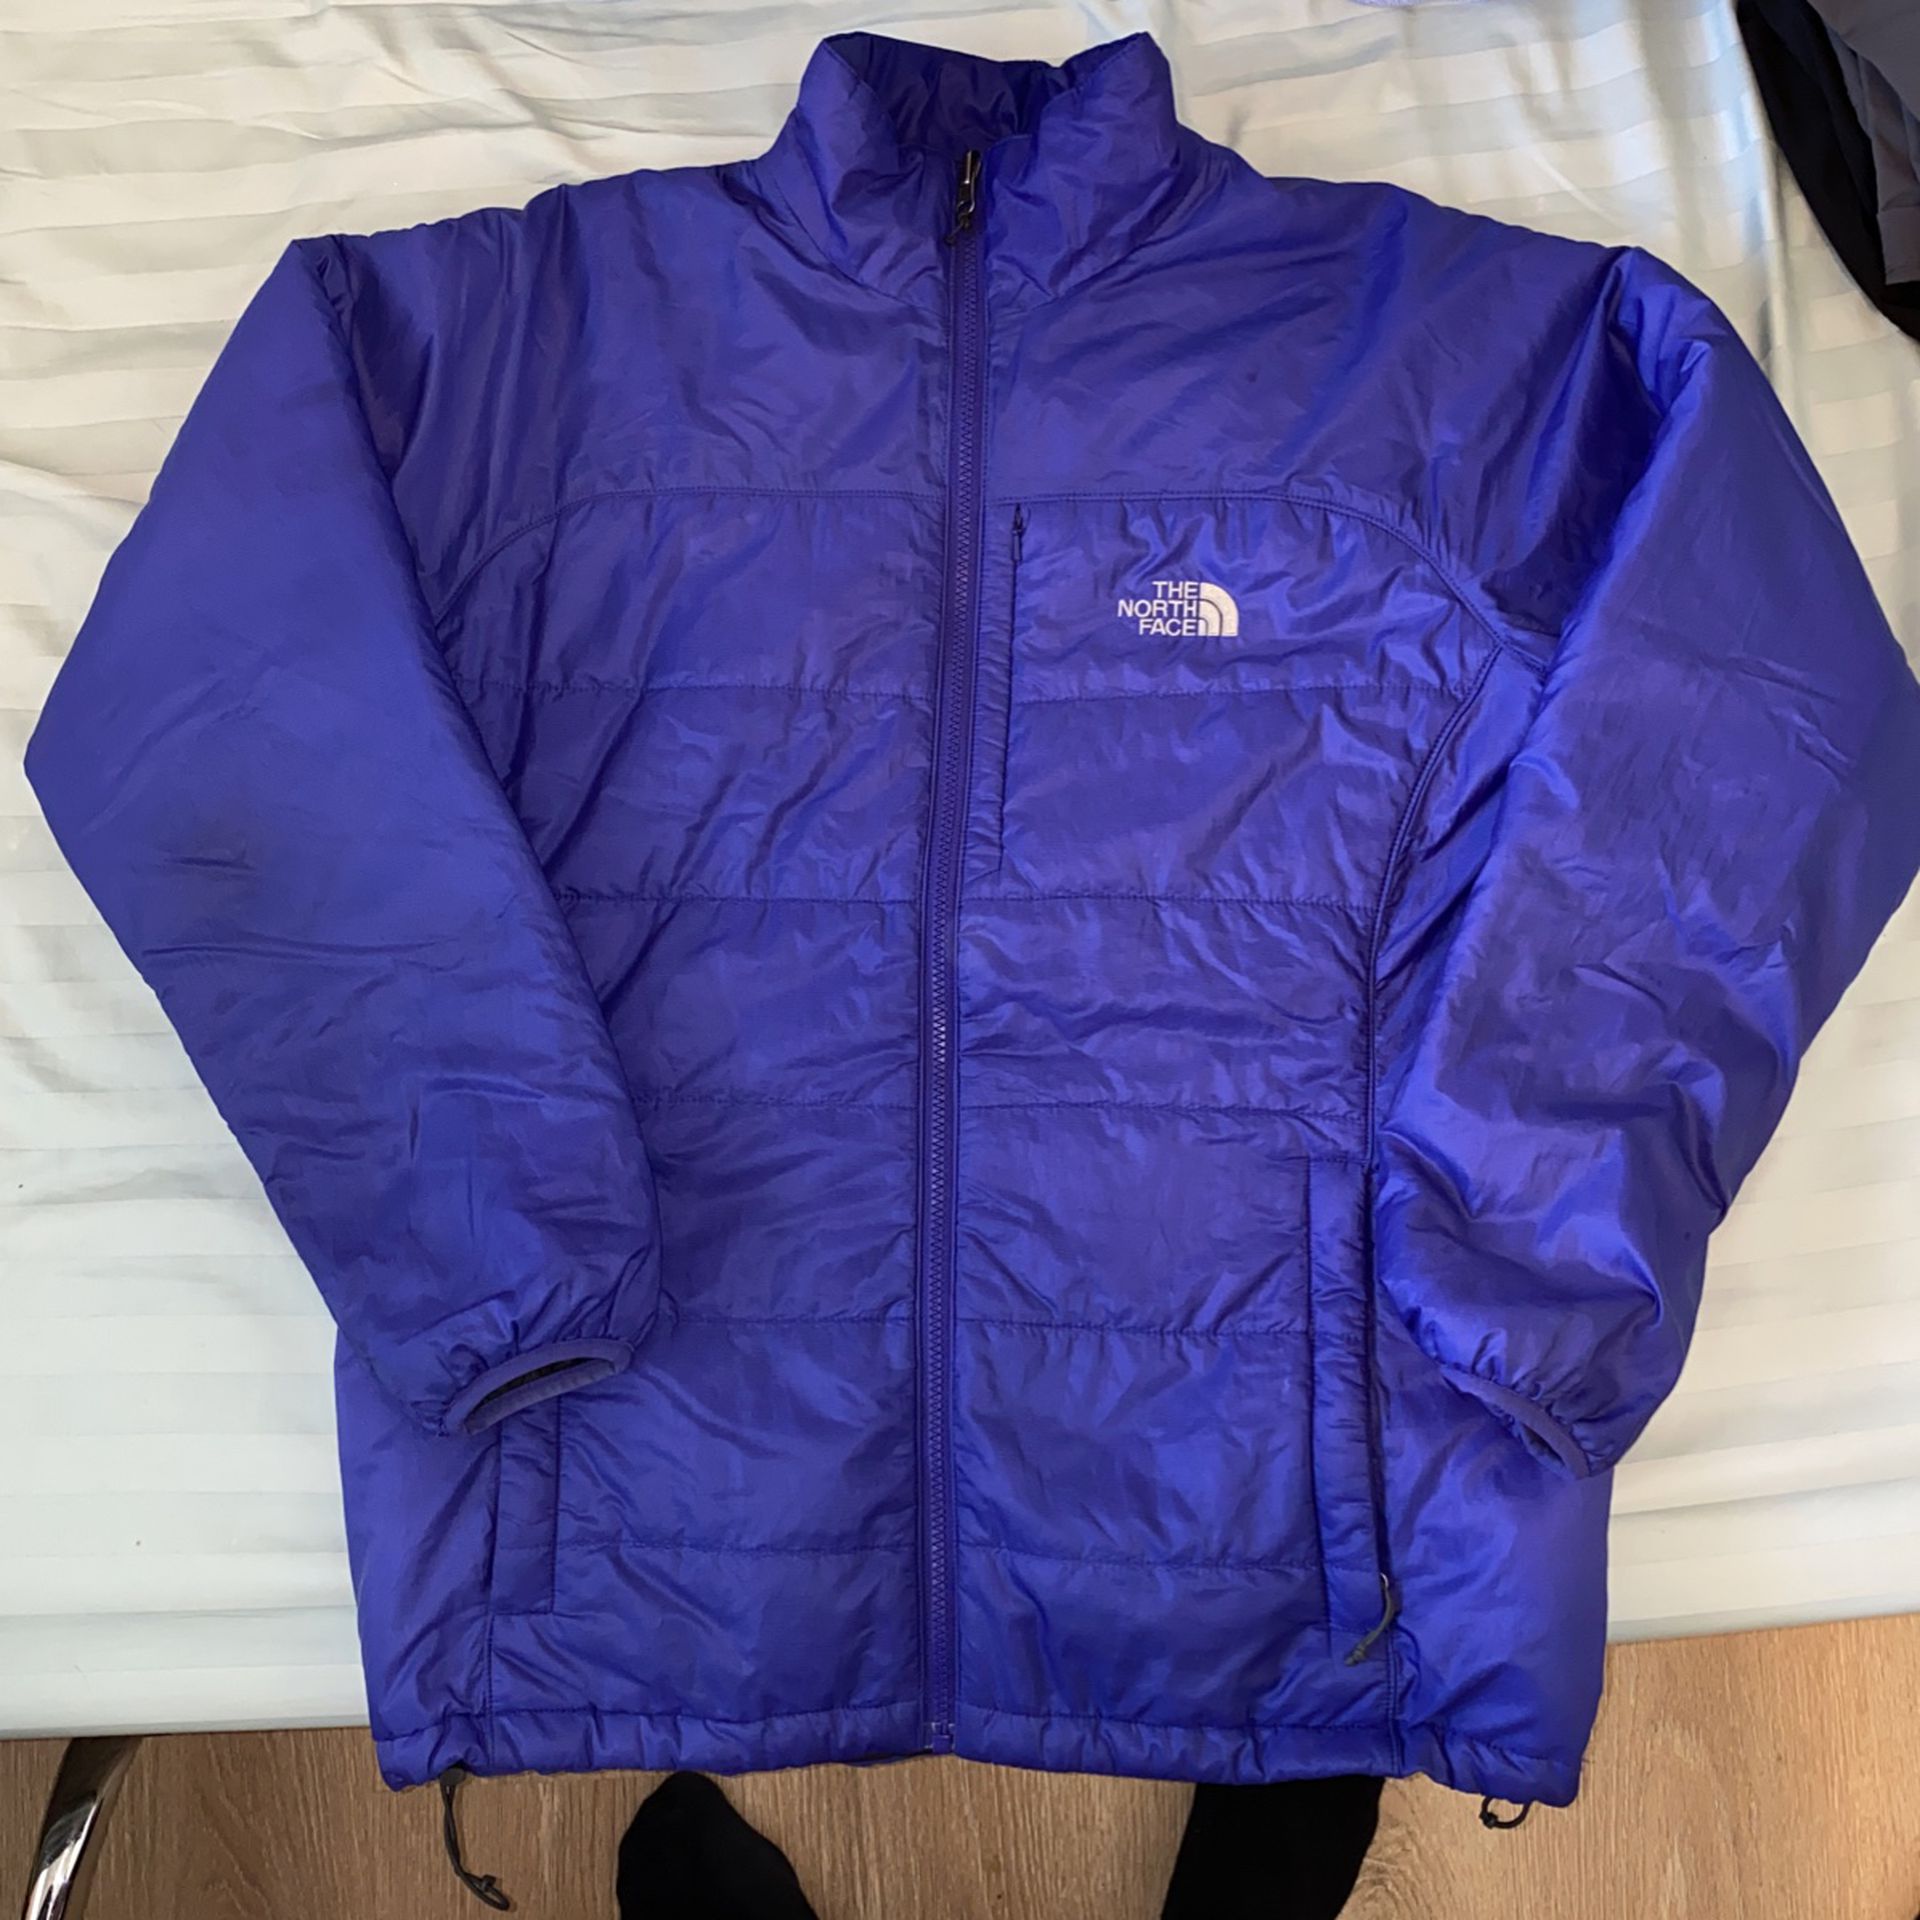 The North Face Insulated Jacket 